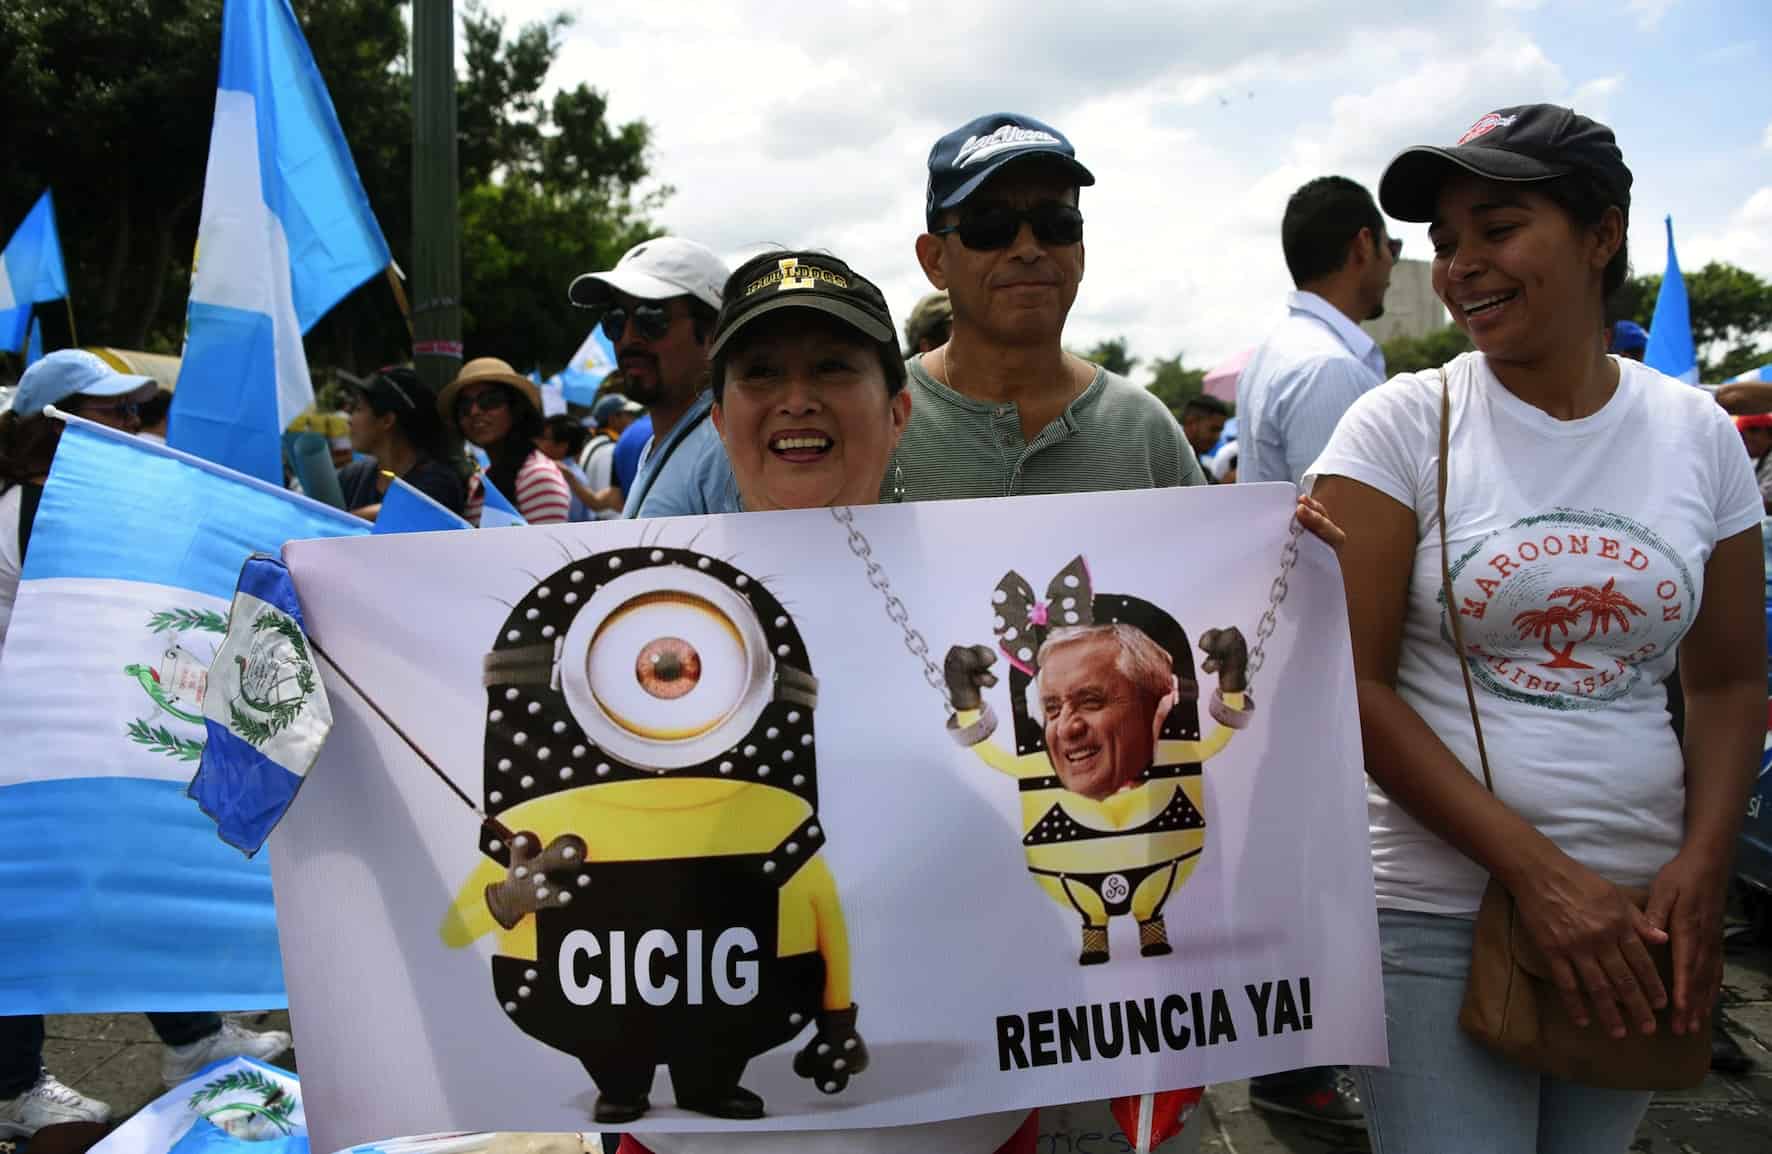 People protest to demand that Guatemalan President Otto Pérez Molina step down over a corruption scandal, in Guatemala City on Aug. 27, 2015.